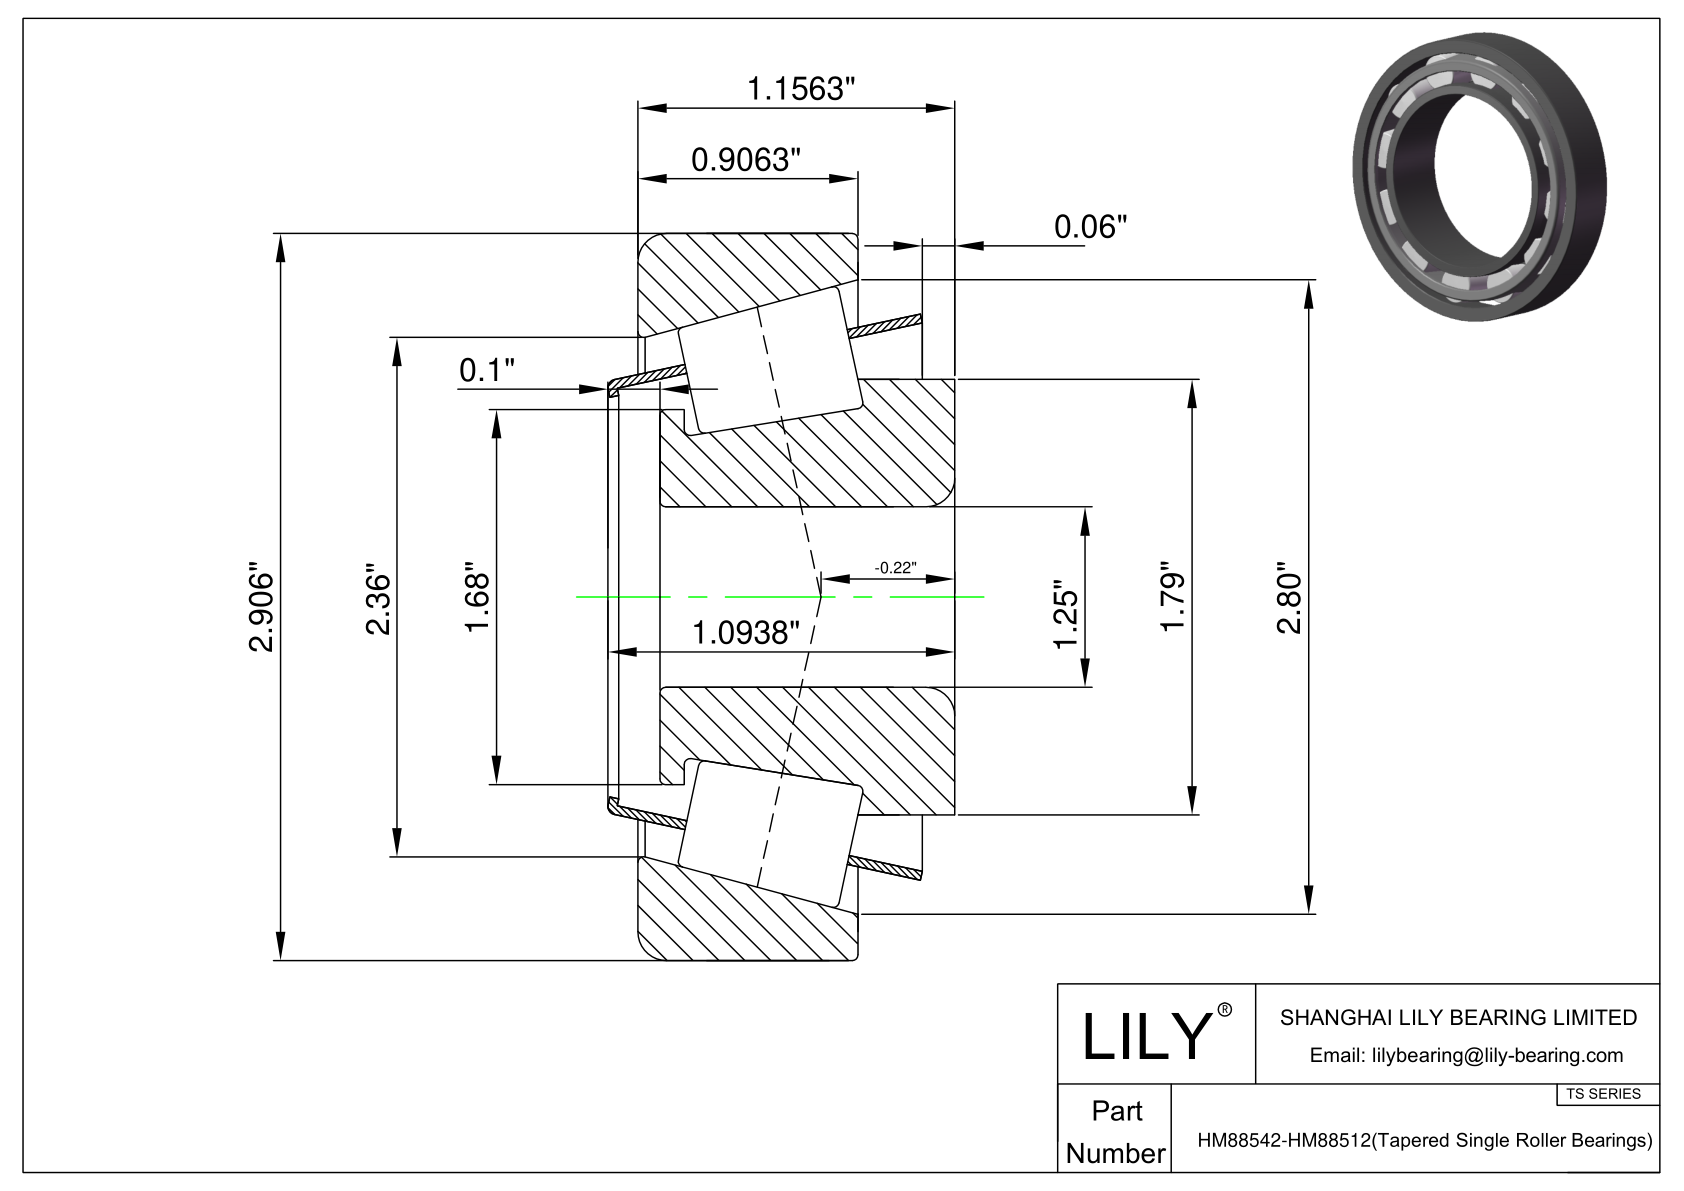 HM88542-HM88512 TS (Tapered Single Roller Bearings) (Imperial) cad drawing